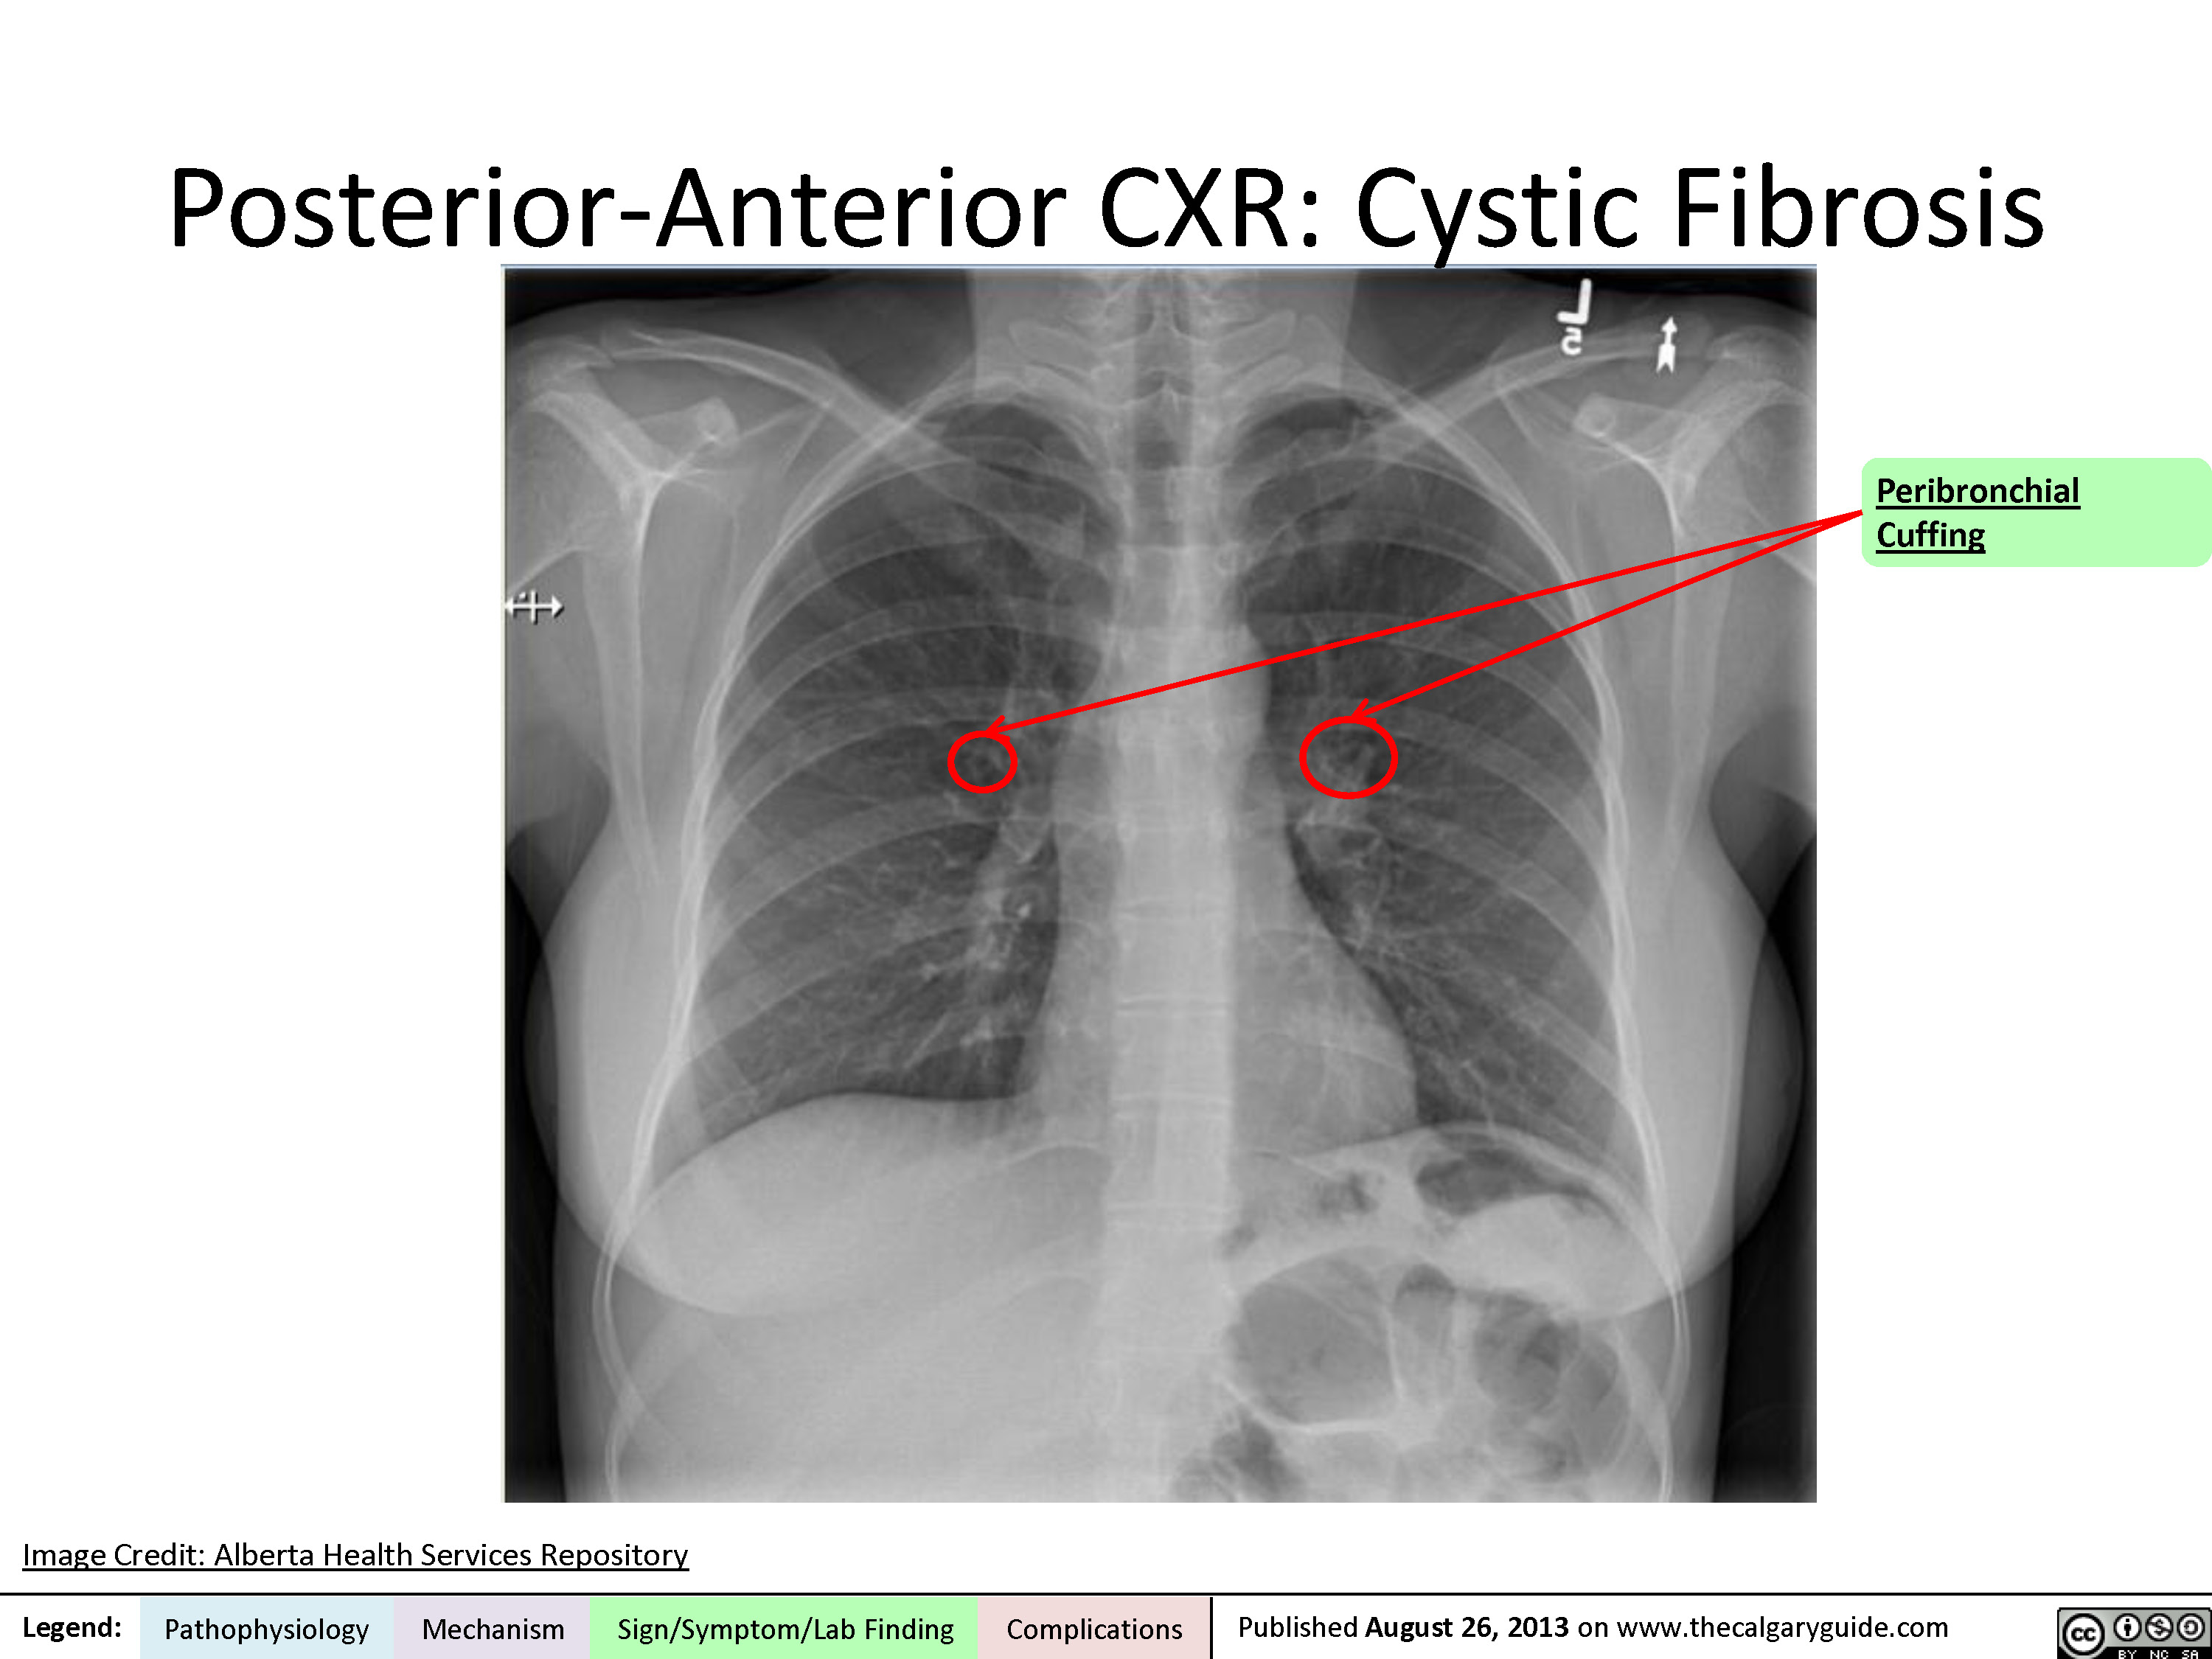 Cystic Fibrosis: Posterior-Anterior Chest X-Ray | Calgary Guide